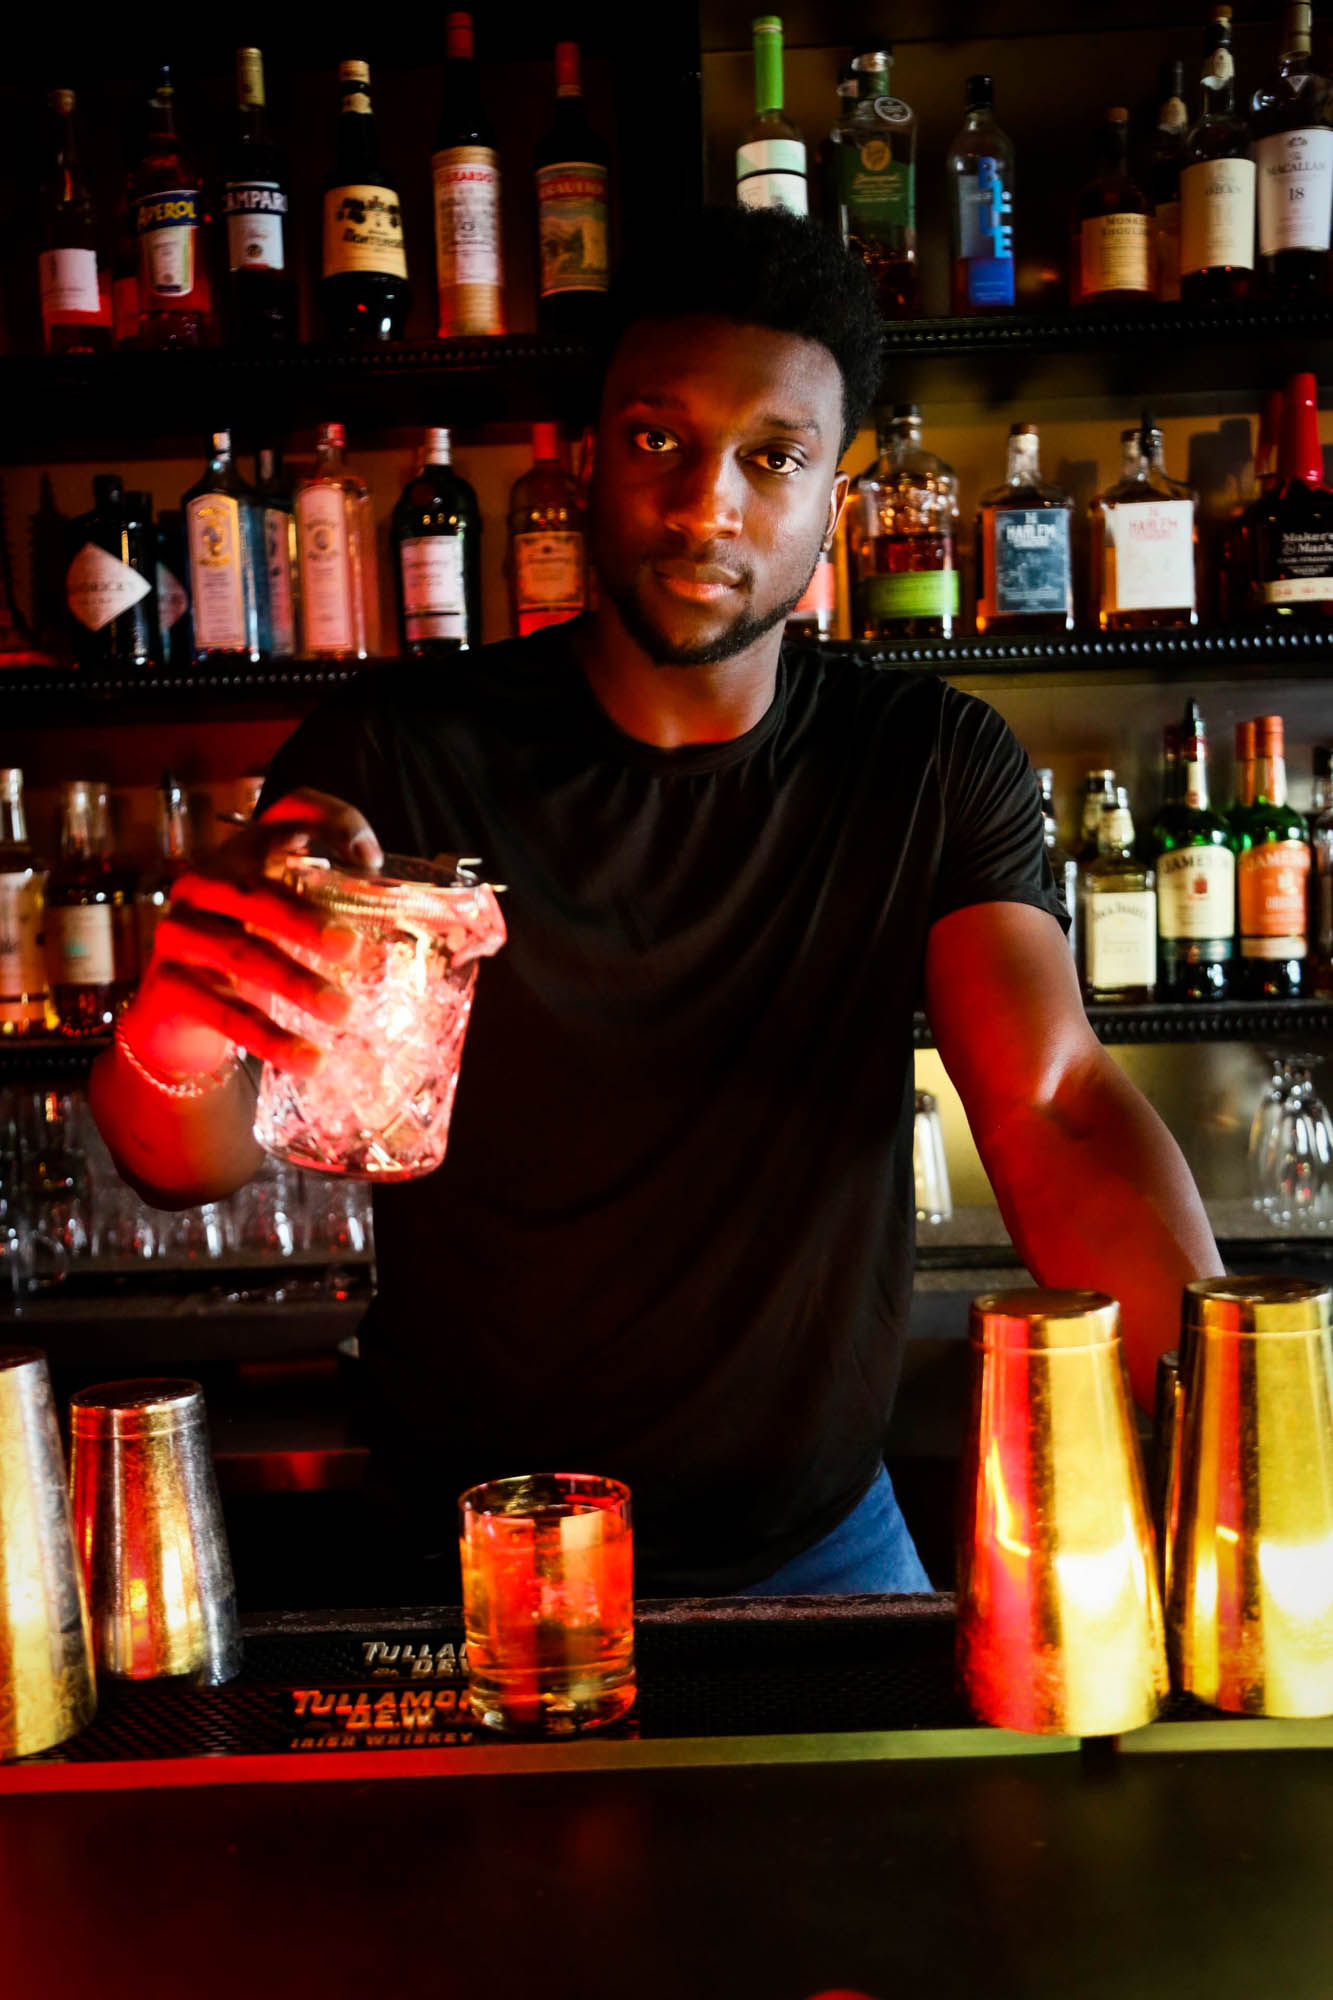 Bartender looking at the camera while serving a drink photo